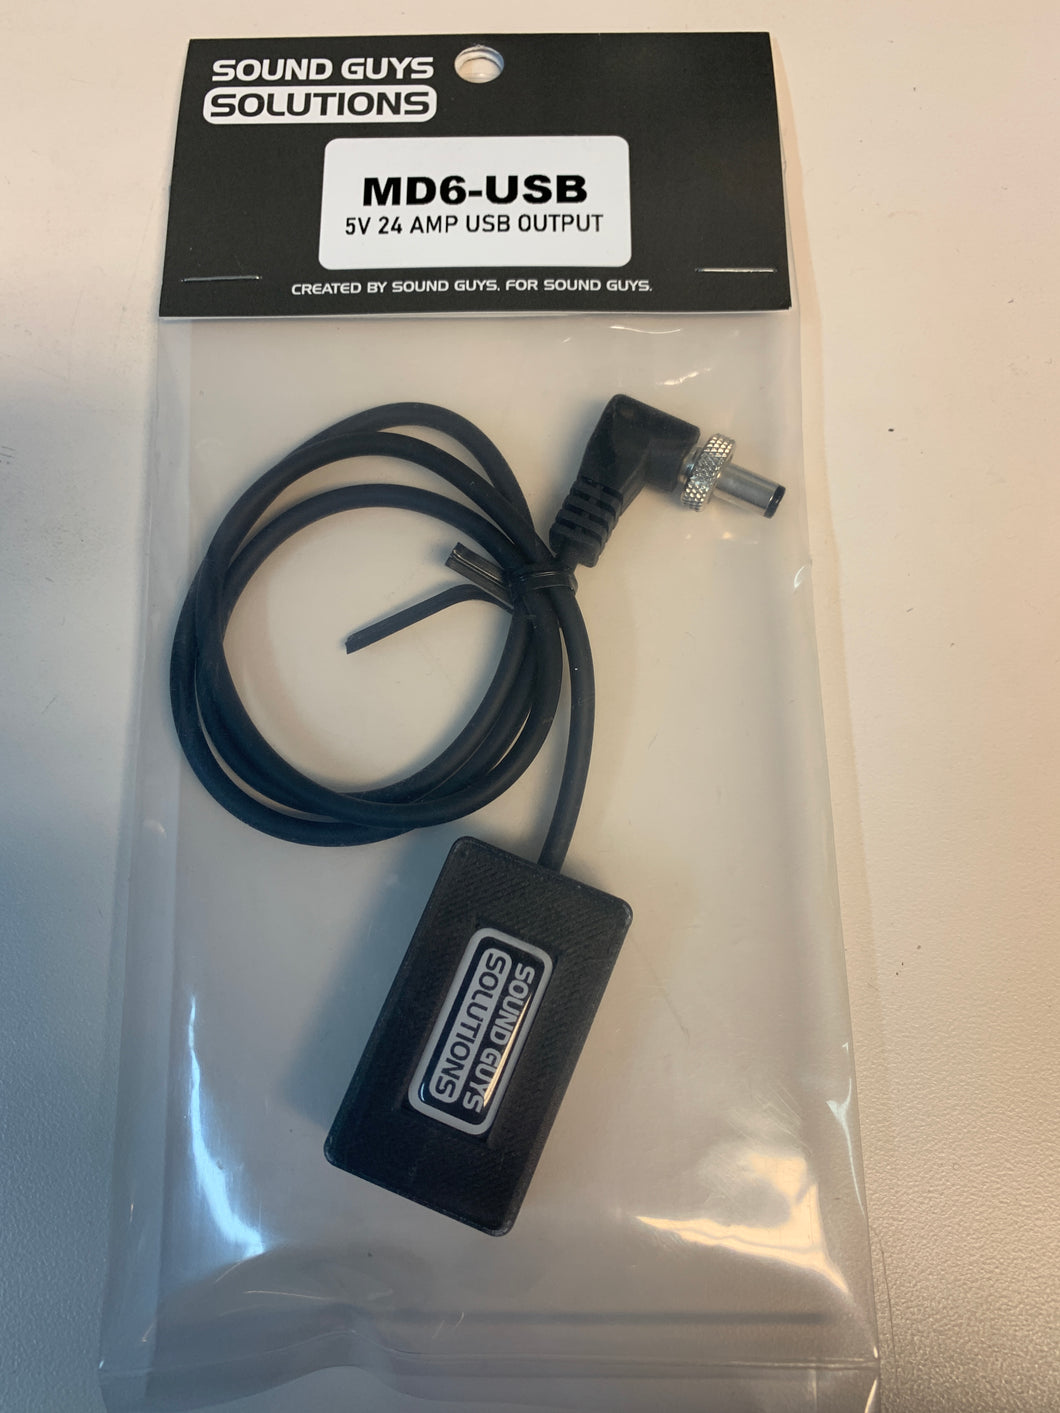 Sound Guys Solutions MD6-USB